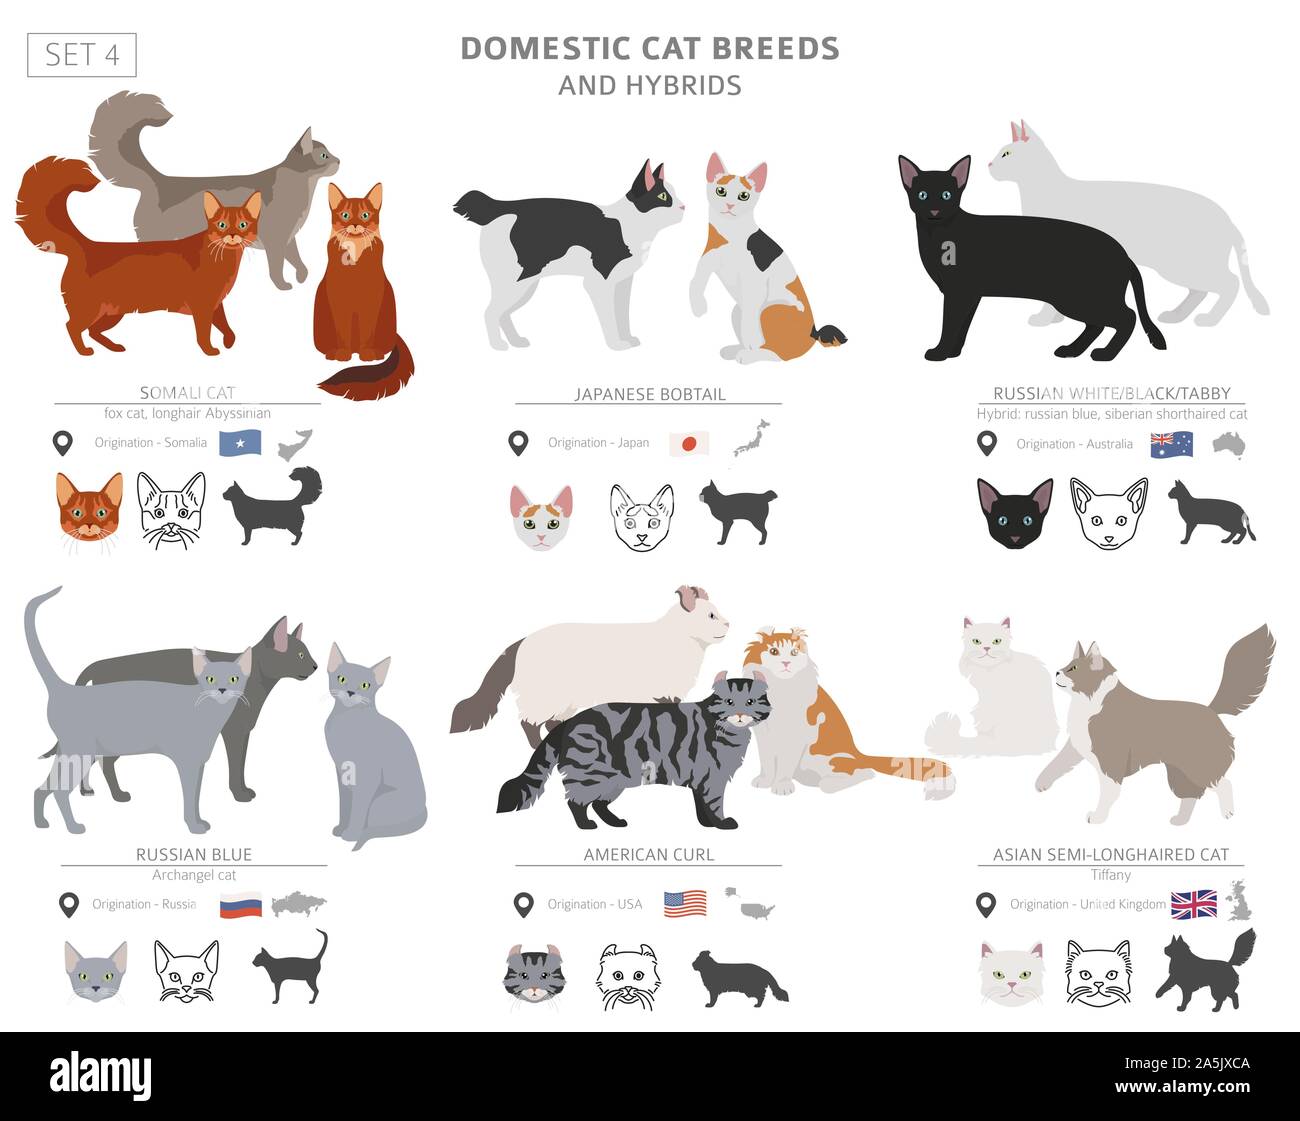 Domestic cat breeds and hybrids collection isolated on white. Flat ...